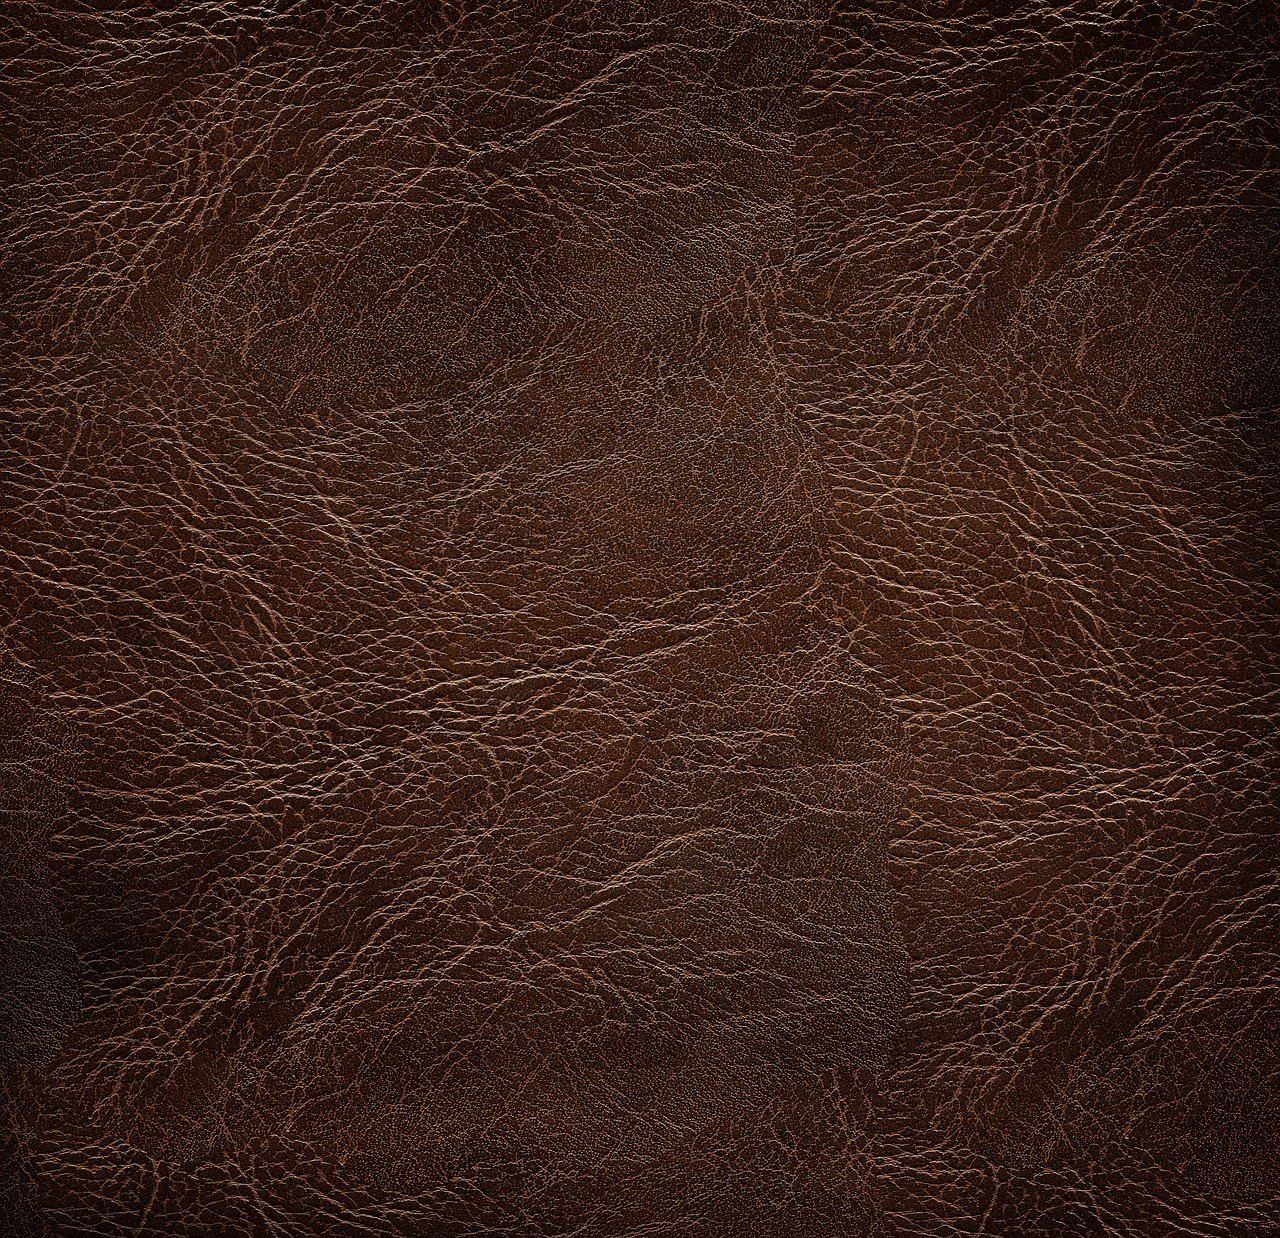 background  leather  texture free photo